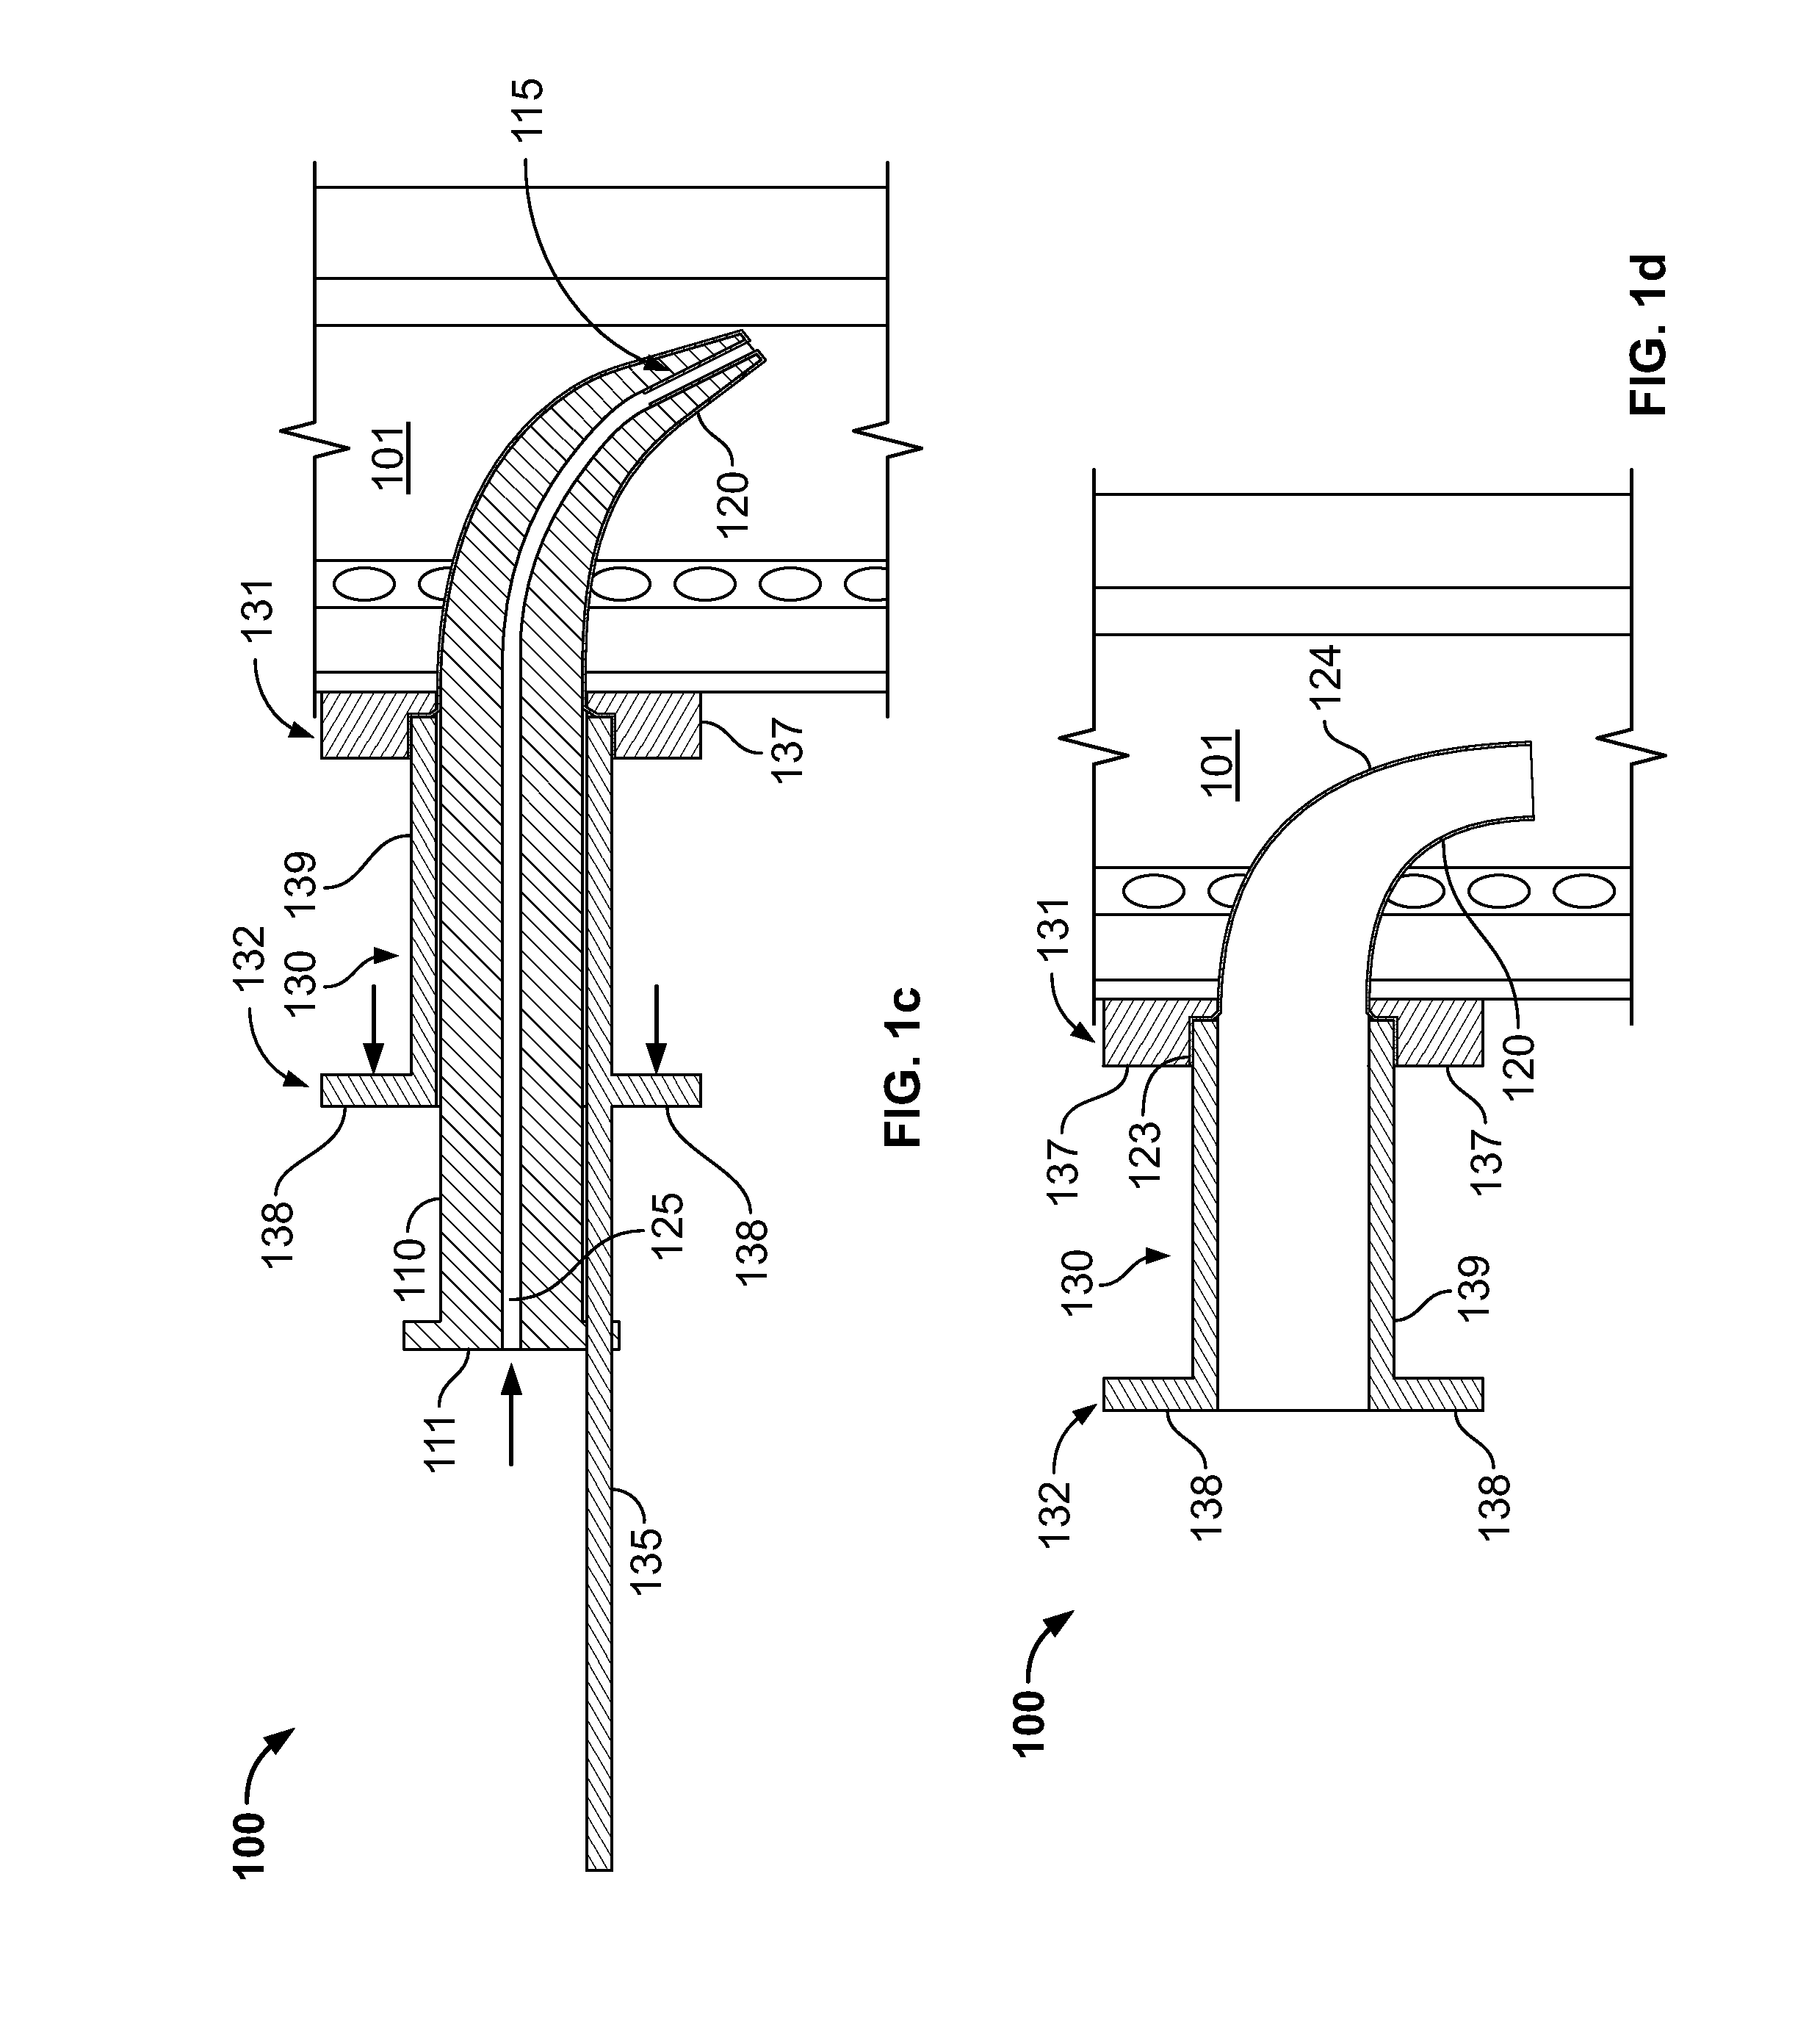 Everting device and method for tracheostomy